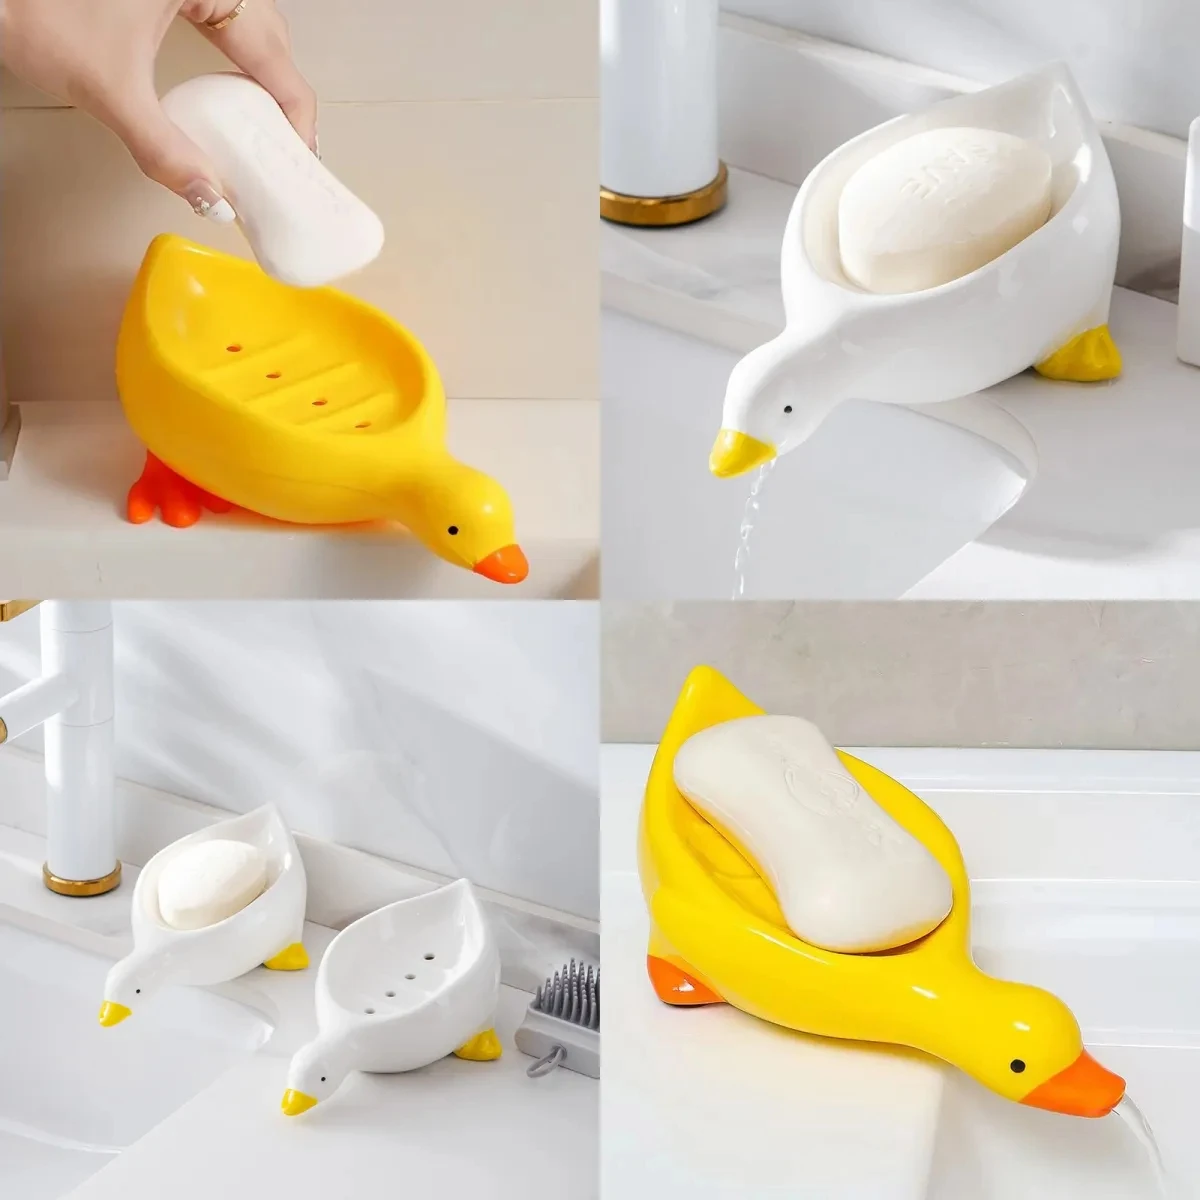 

1PC Yellow Duck Shape Soap Dish Cartoon Soap Box Drainable Soap Holder Soap Container Soap Dish for Tray Bathroom Accessories